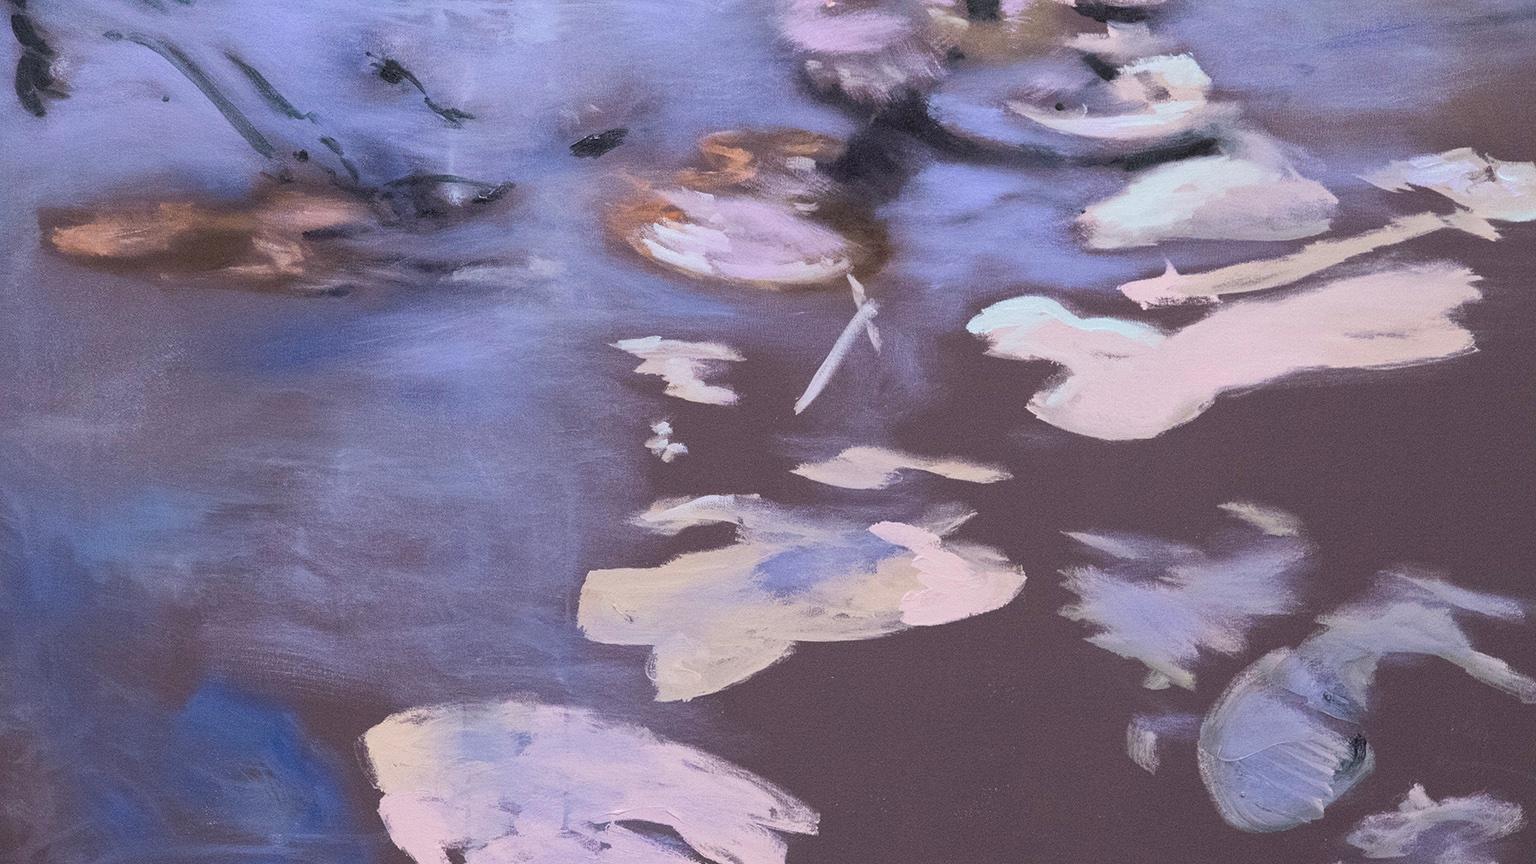 Nocturnal Violet and Lilac 78 X 90 , Oil on Canvas.
Antonio Ugarte paints water as a reflection of the spirit, a form of meditation. He sees water as “a primordial element” in life and the physical environment as a source of both energy and